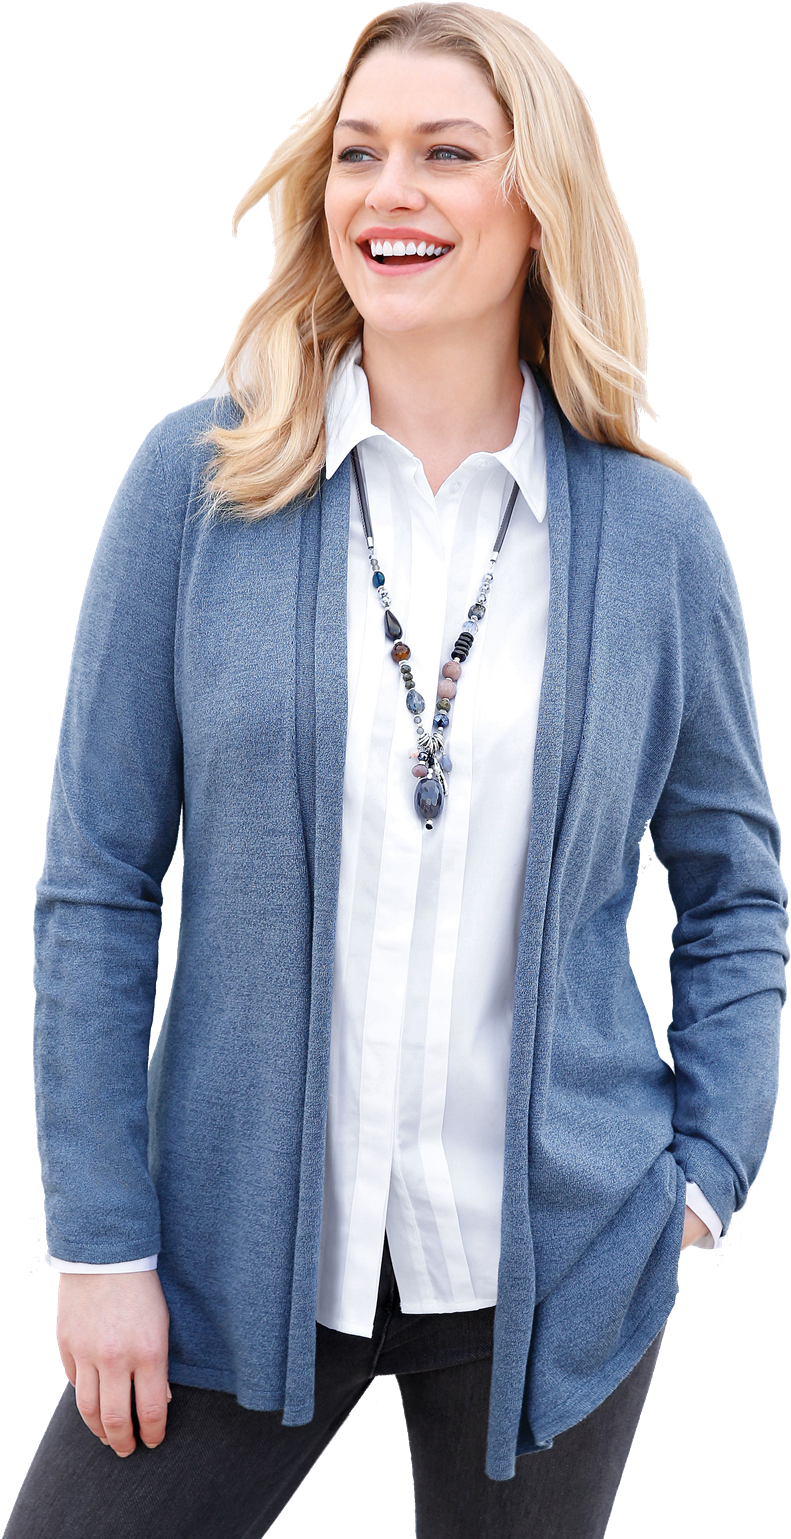 A Woman Wearing A Blue Cardigan And White Shirt